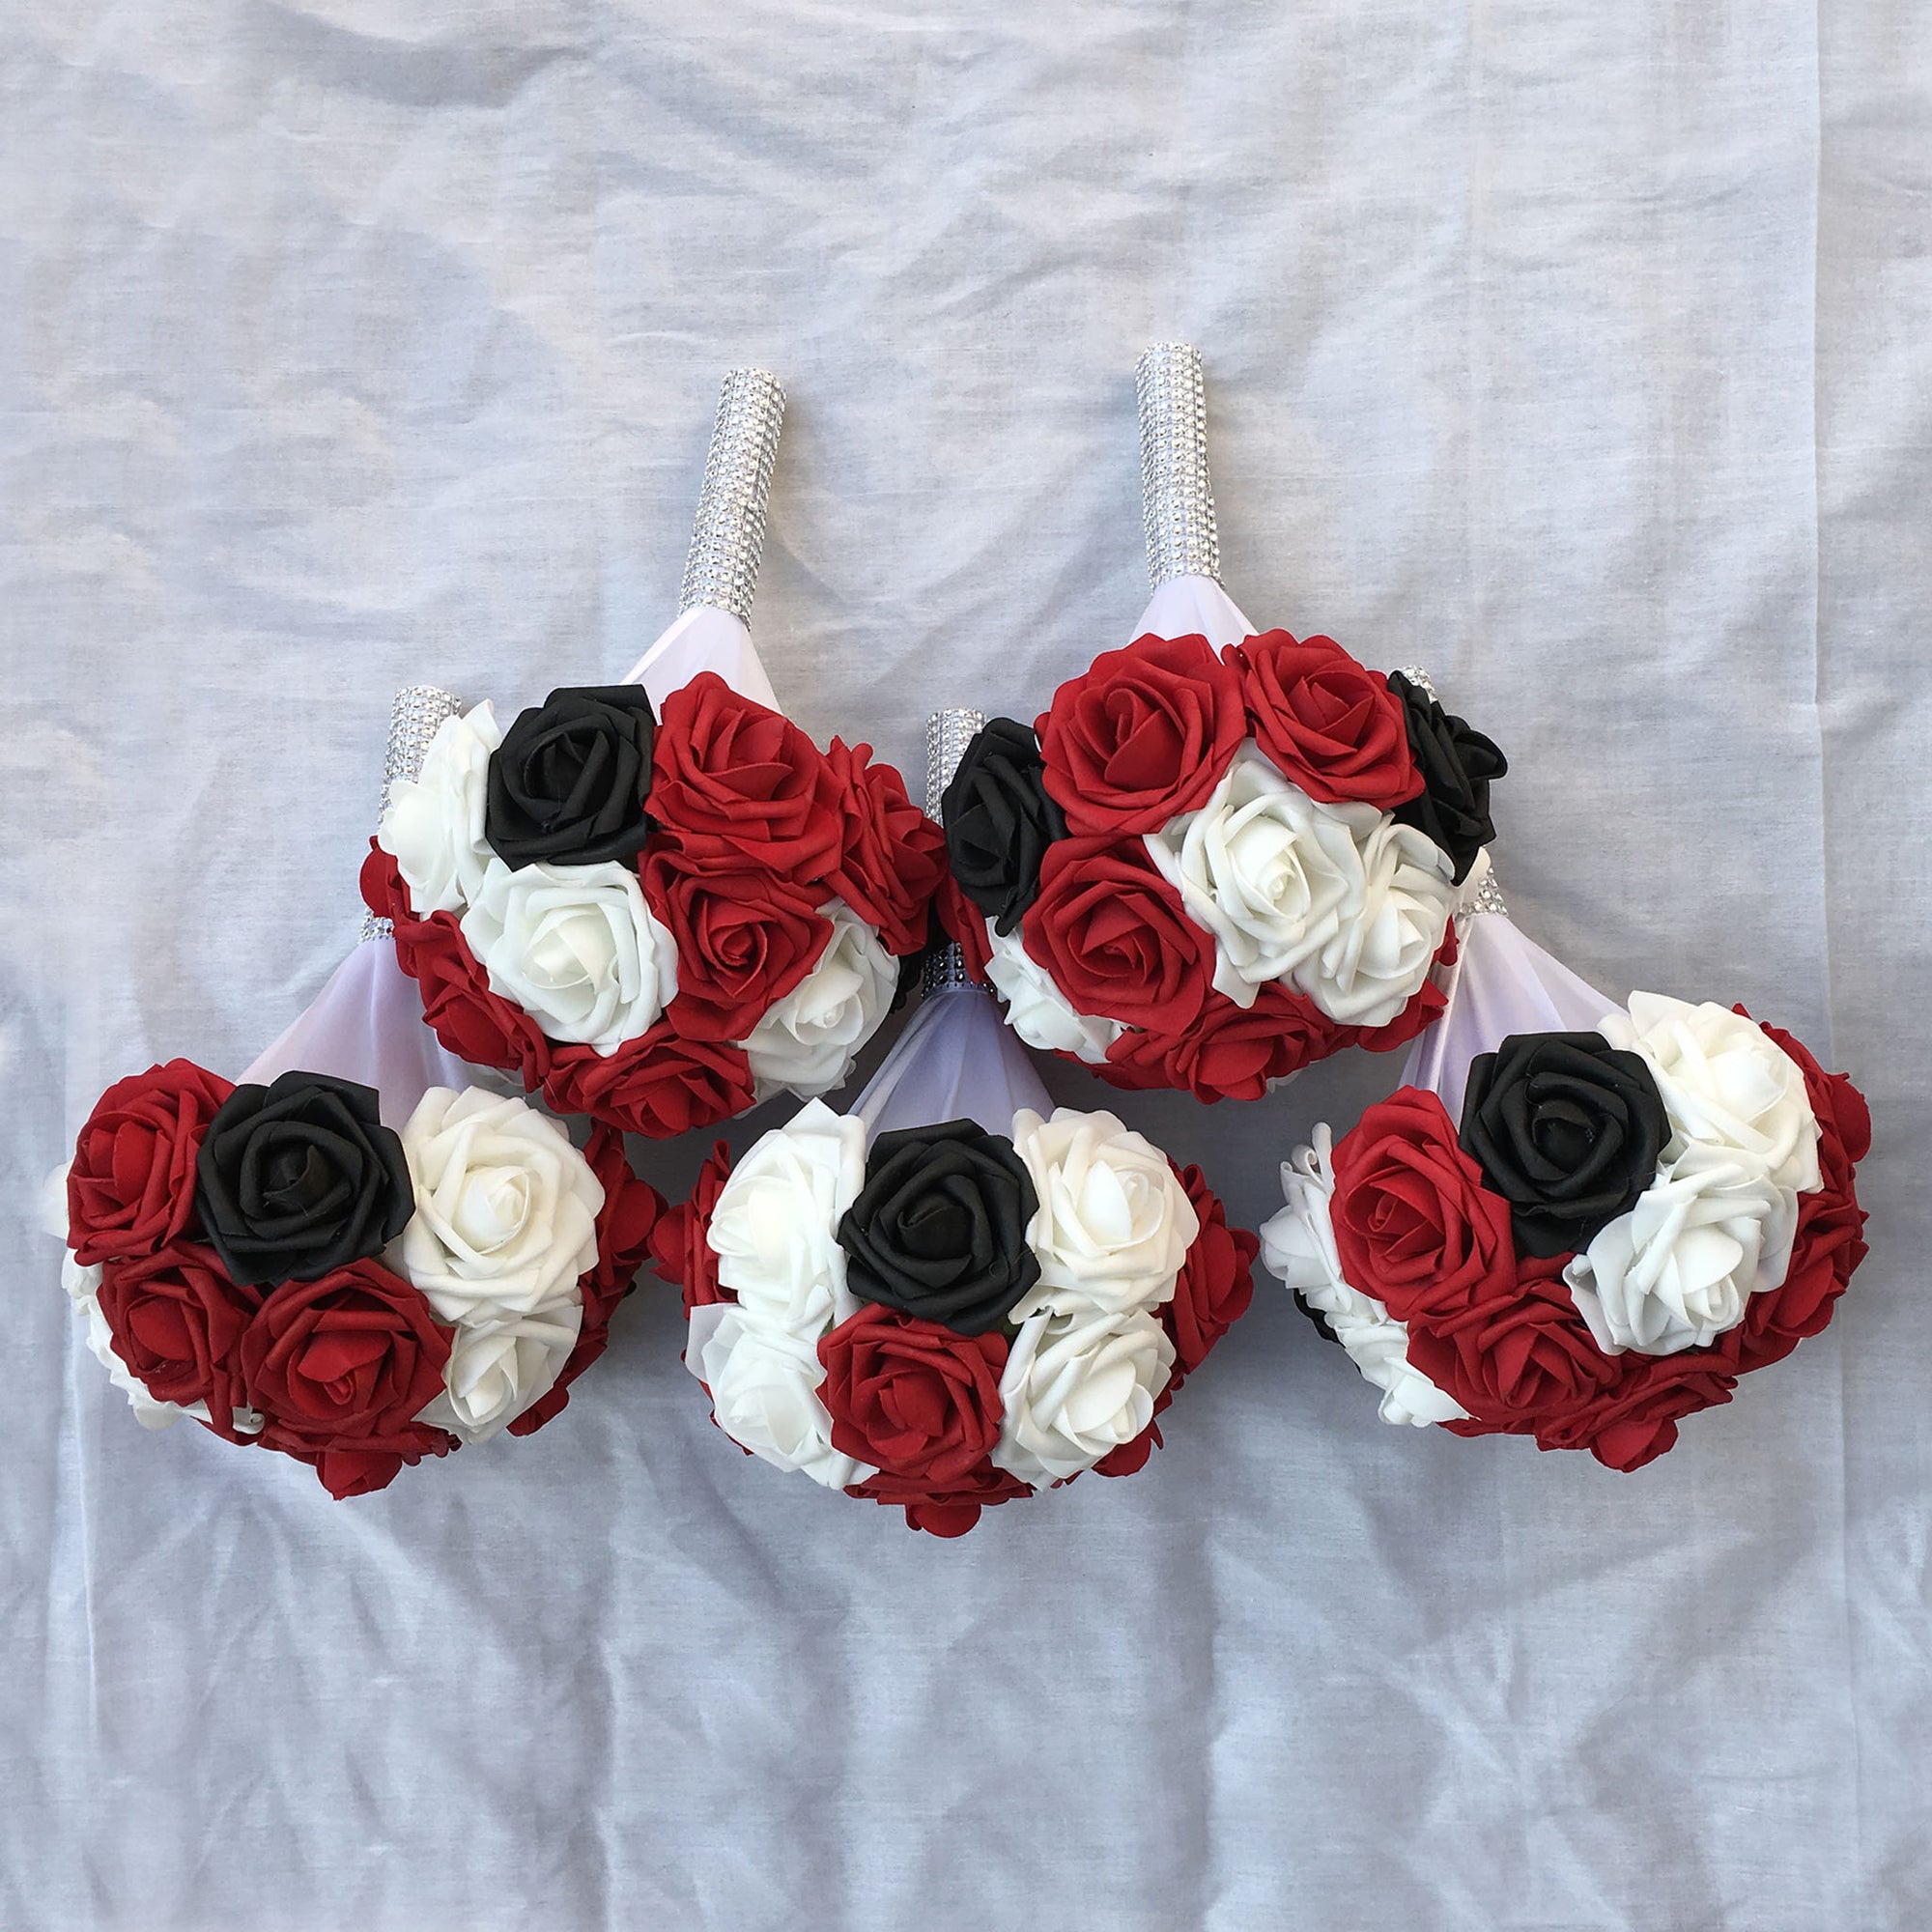 Wedding Bouquets Package for 5 Bridesmaids Dark Red Black White Roses